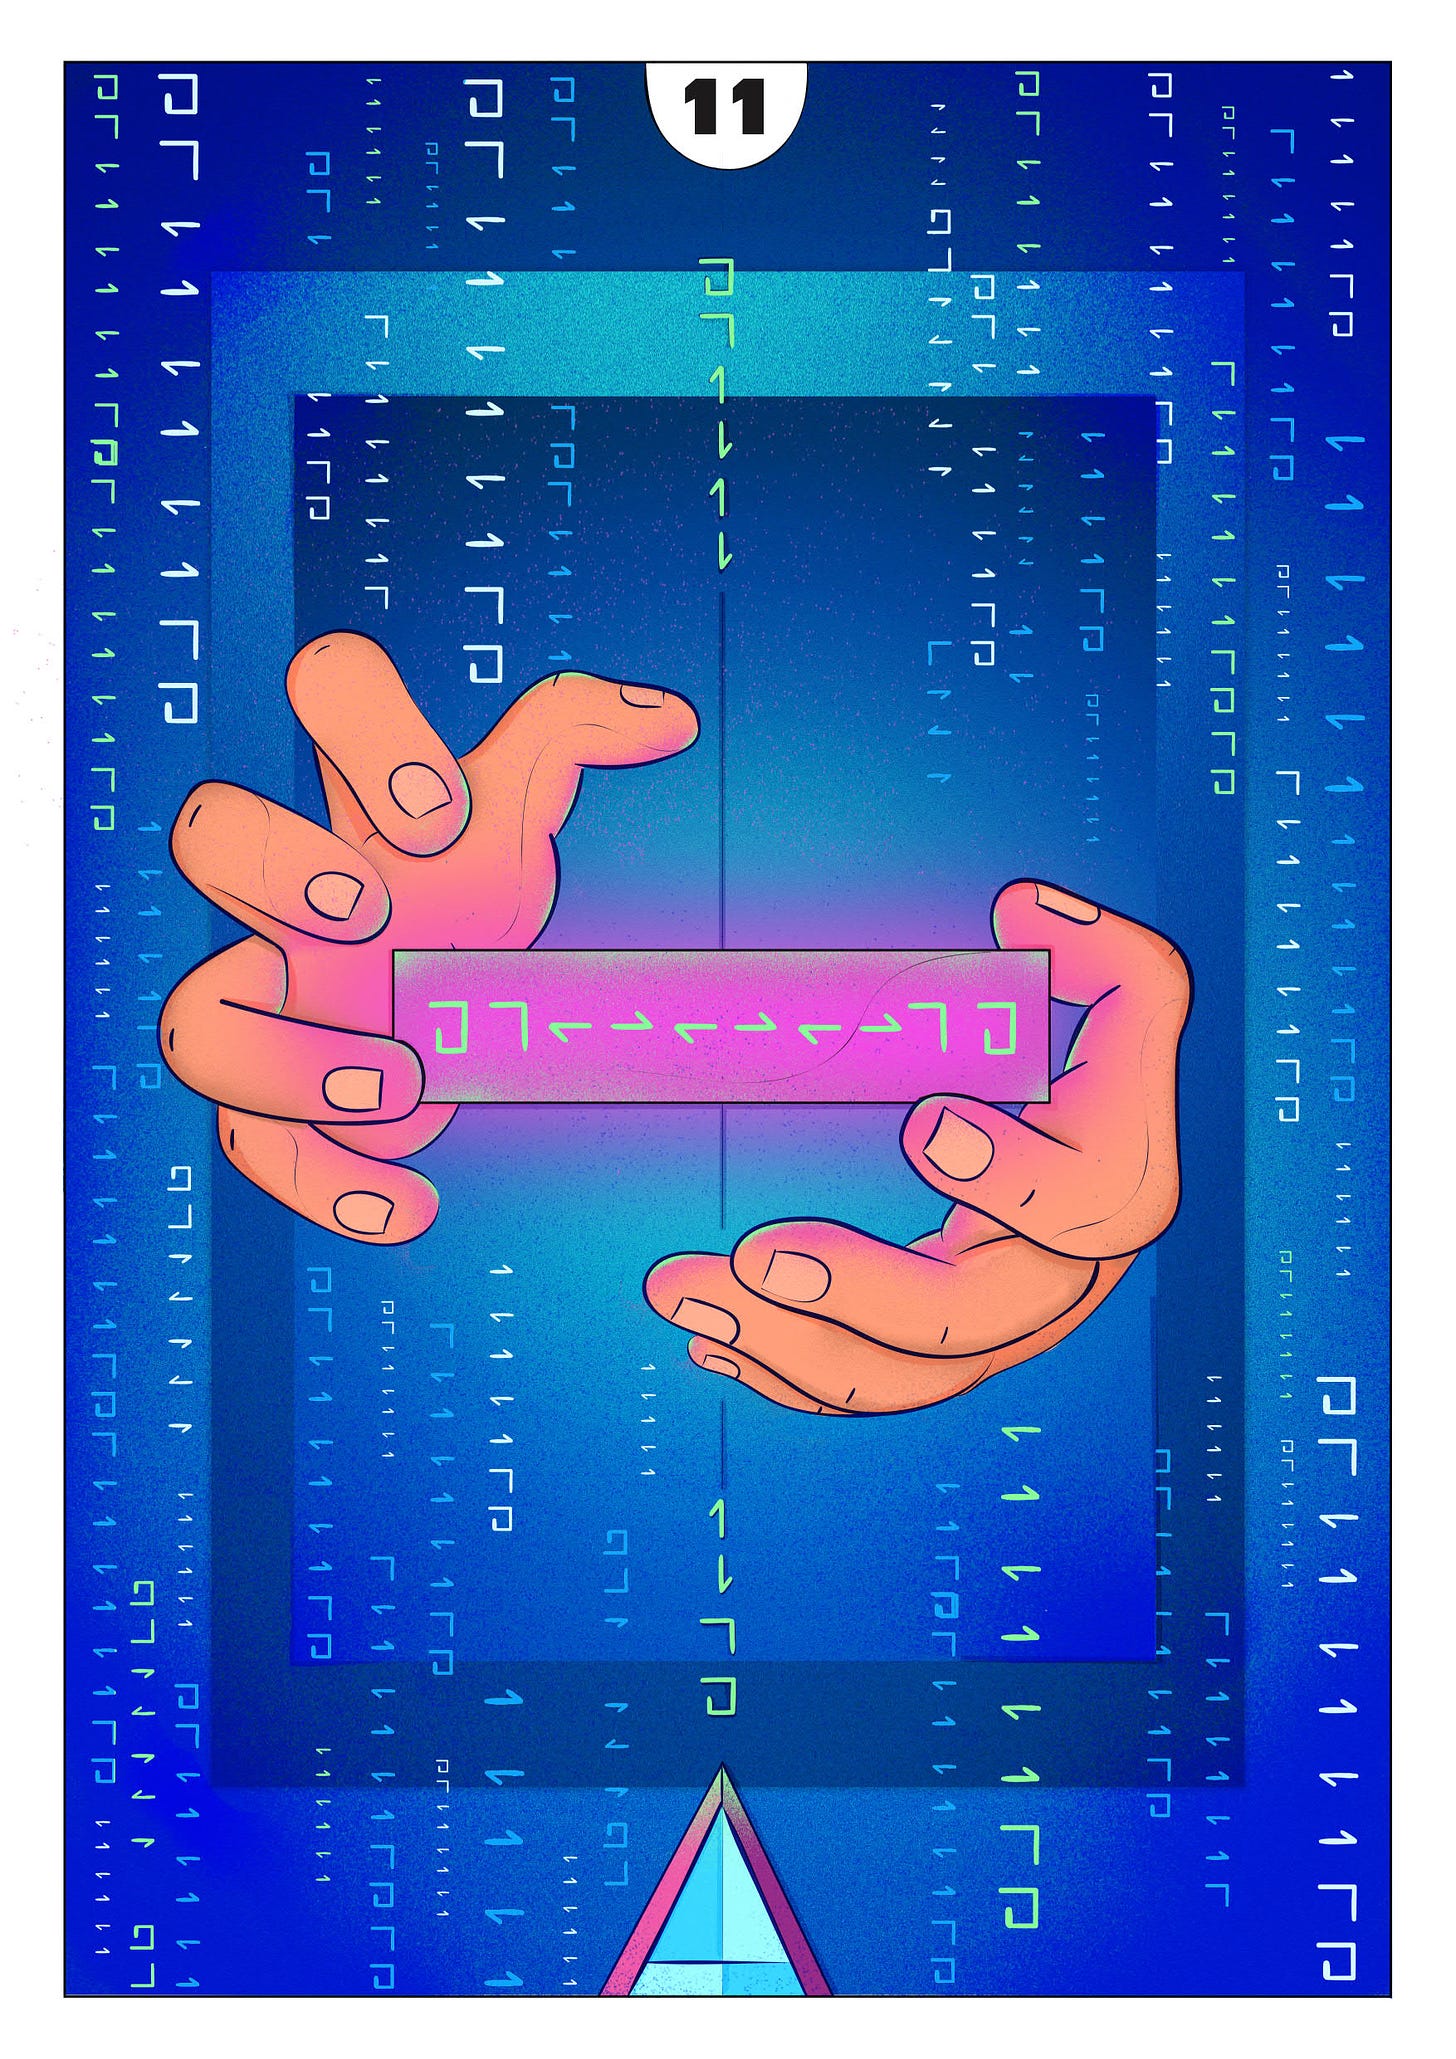 A blue background. Vertical lines of symbols used to map story structure fall Matrix-like in vertical lines. The hands frame a tablet on which the Quest structure is symbolised.